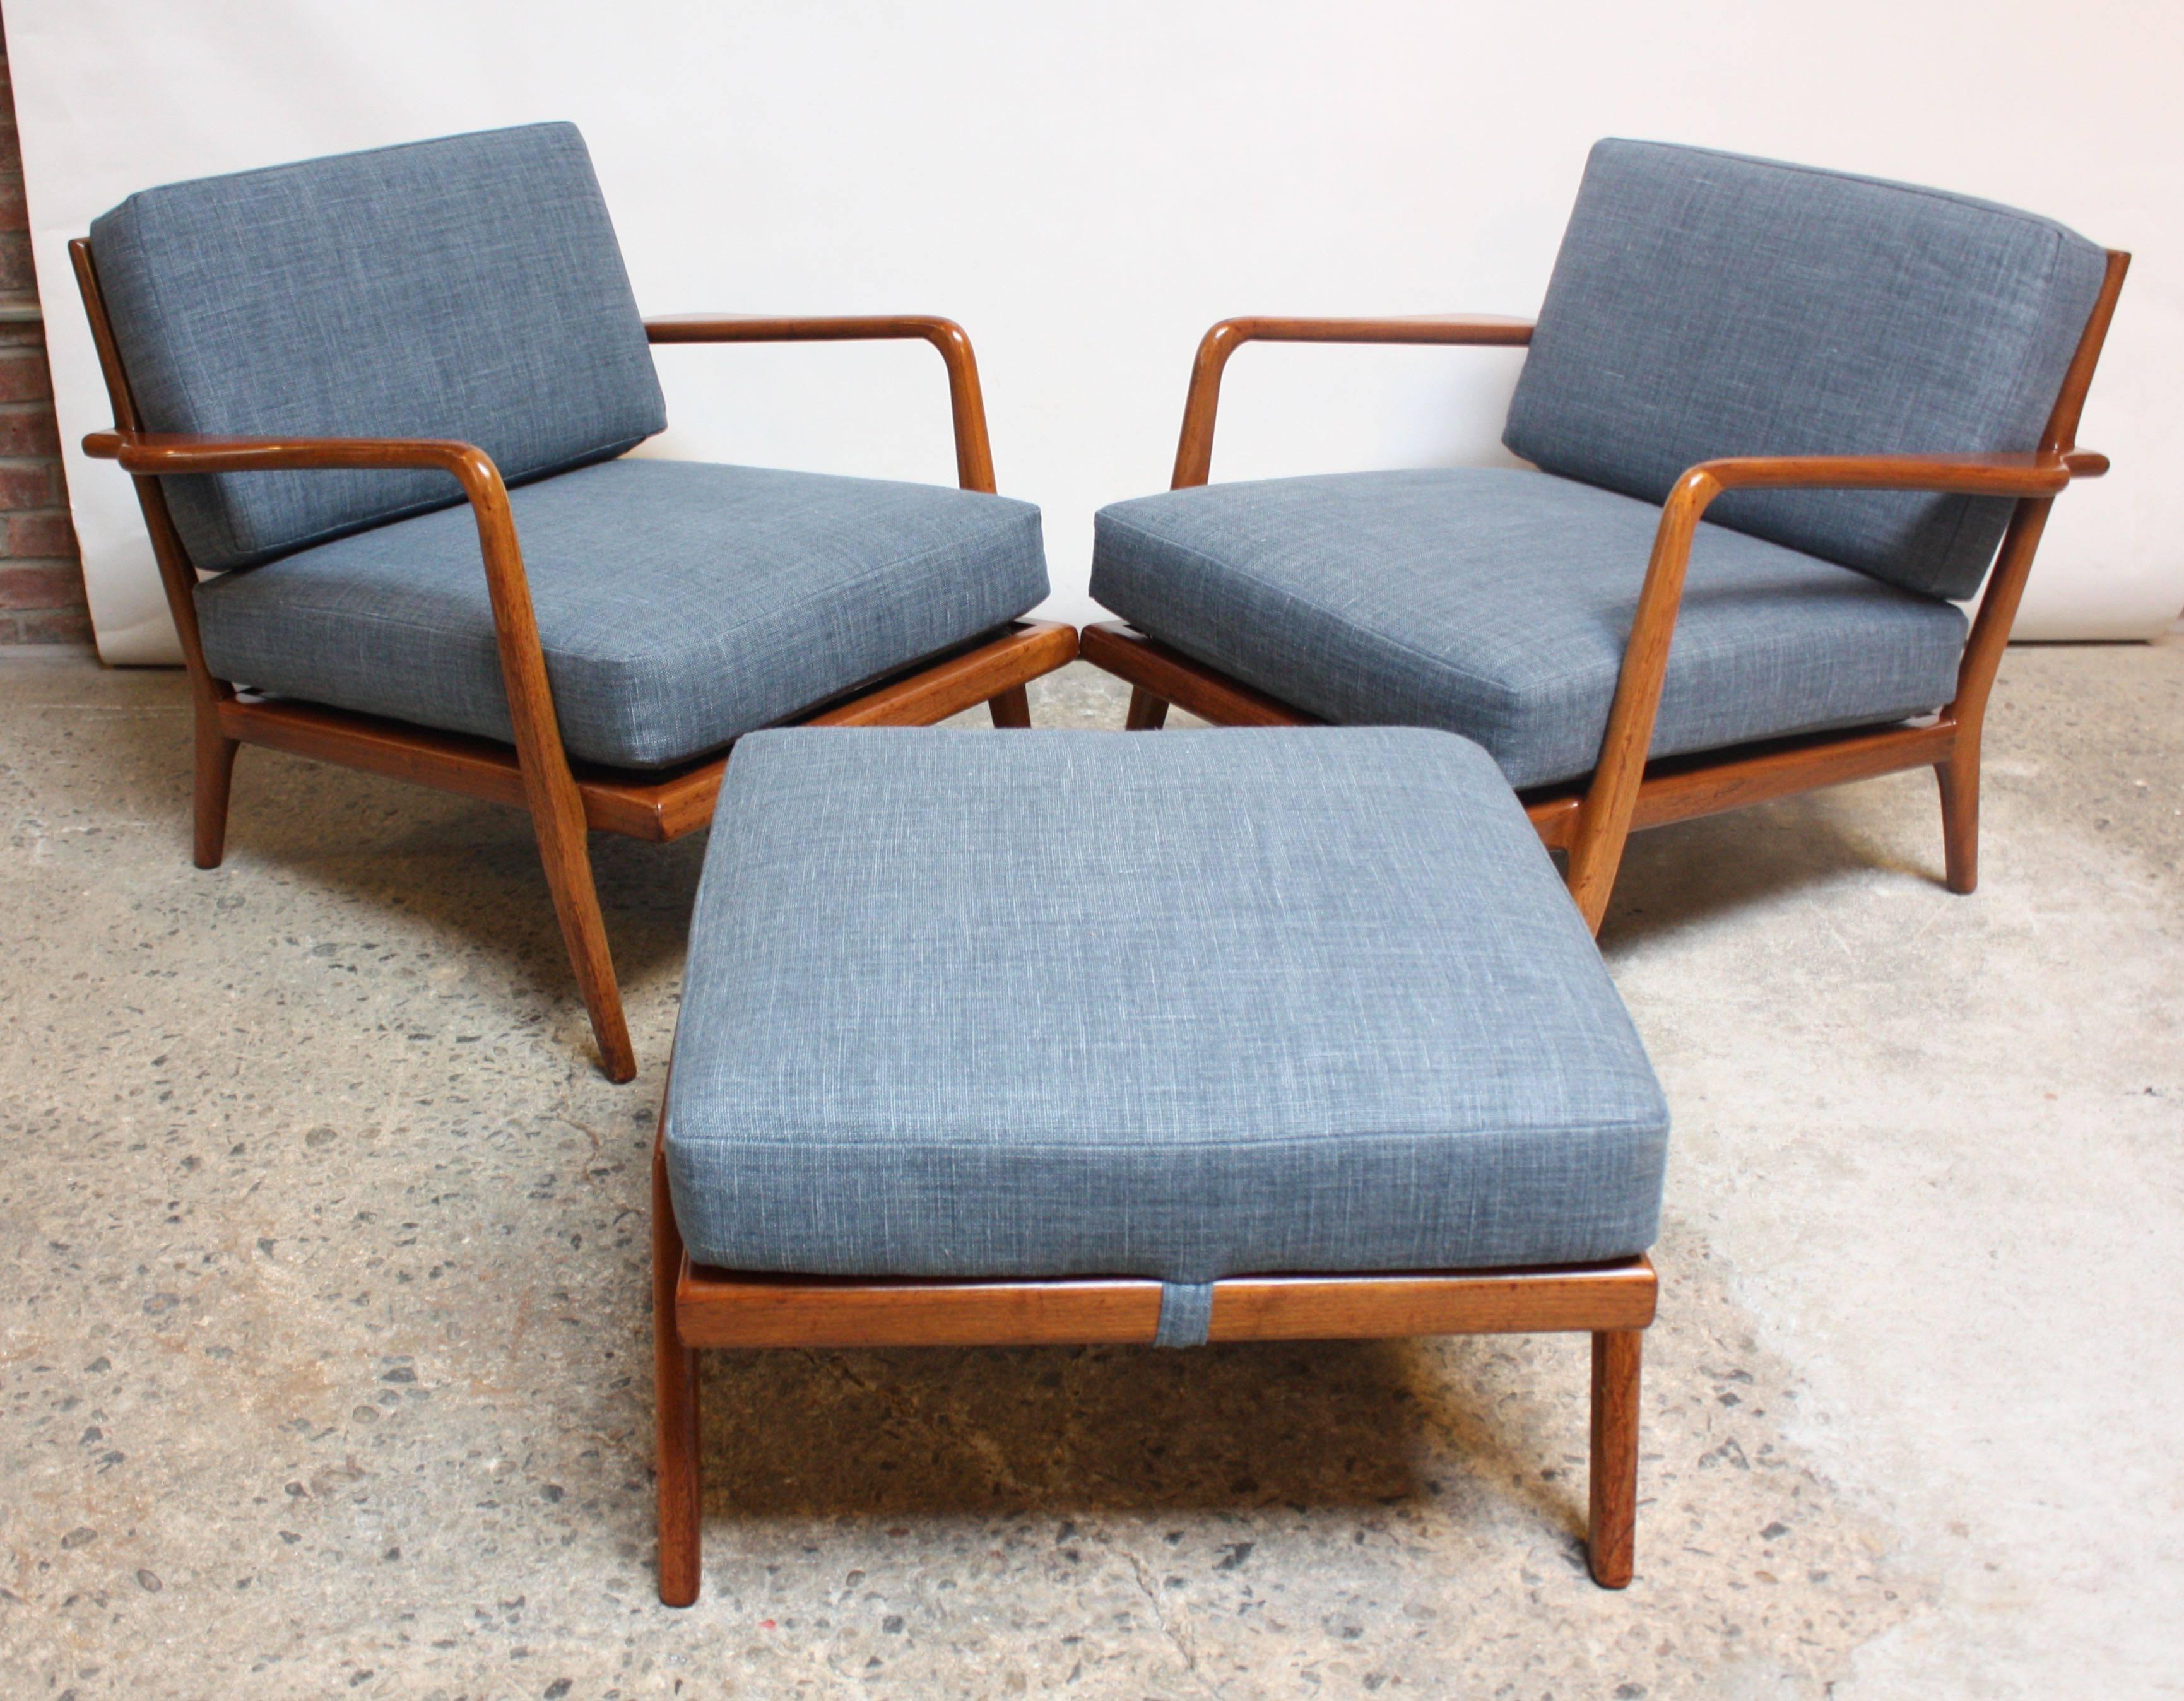 This pair of chairs and single ottoman were designed by Mel Smilow in the 1950s. Solid walnut construction with newly upholstered cushions in a blue linen. The steel straps and metal springs are sound. These extraordinary, vintage examples are